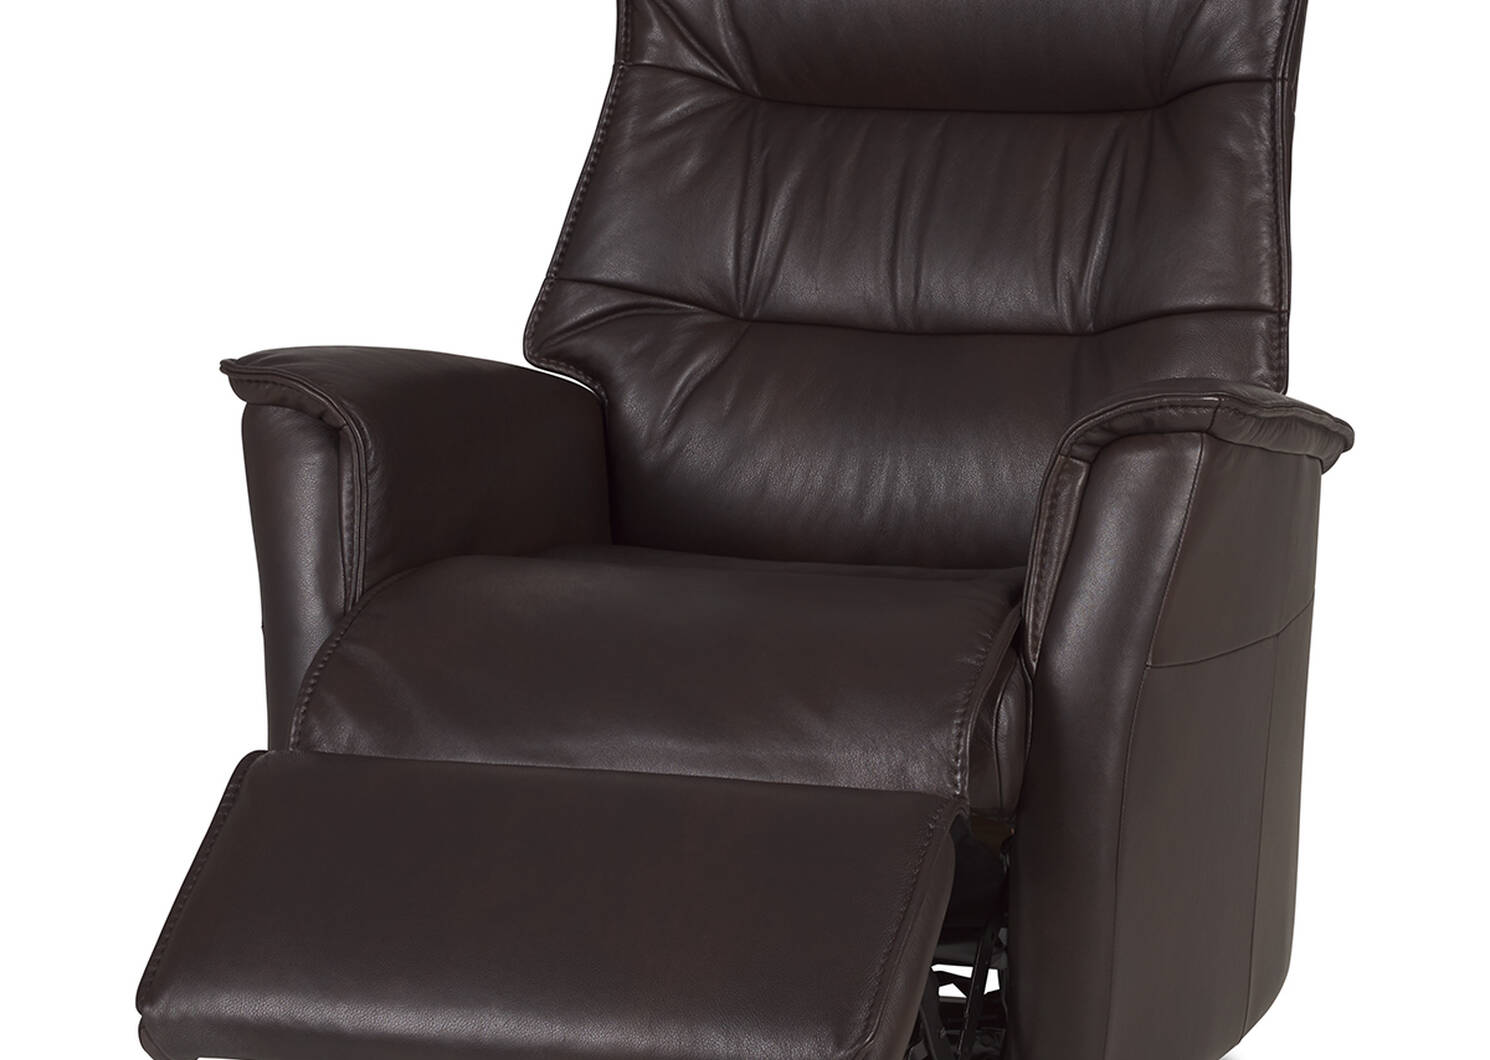 Paramount Leather Recliner -Sol Cocoa | Urban Barn